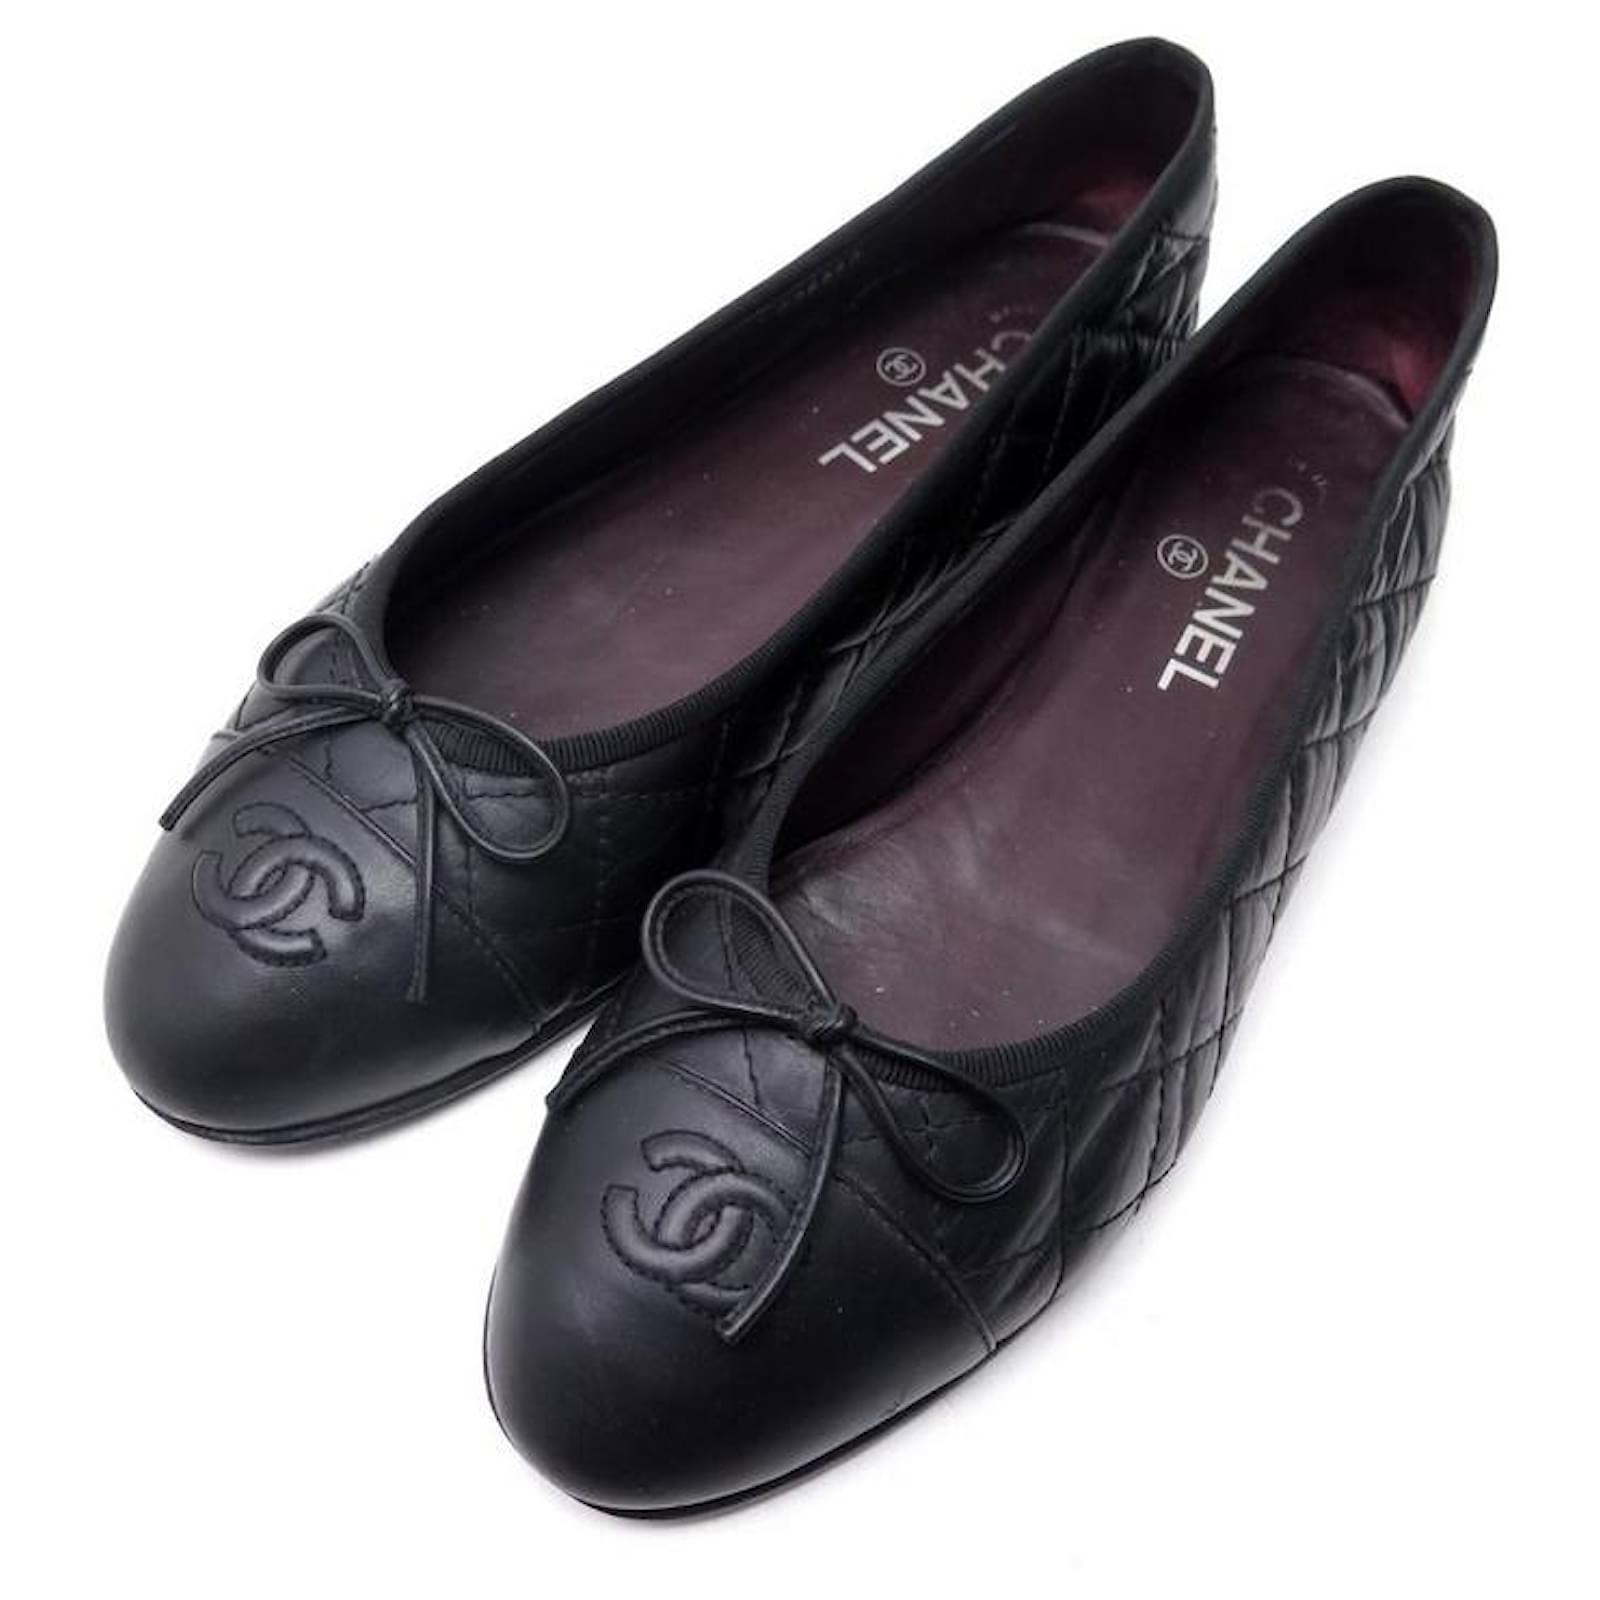 CHANEL LOGO CC G BALLERINAS SHOES26250 39.5 BLACK QUILTED LEATHER